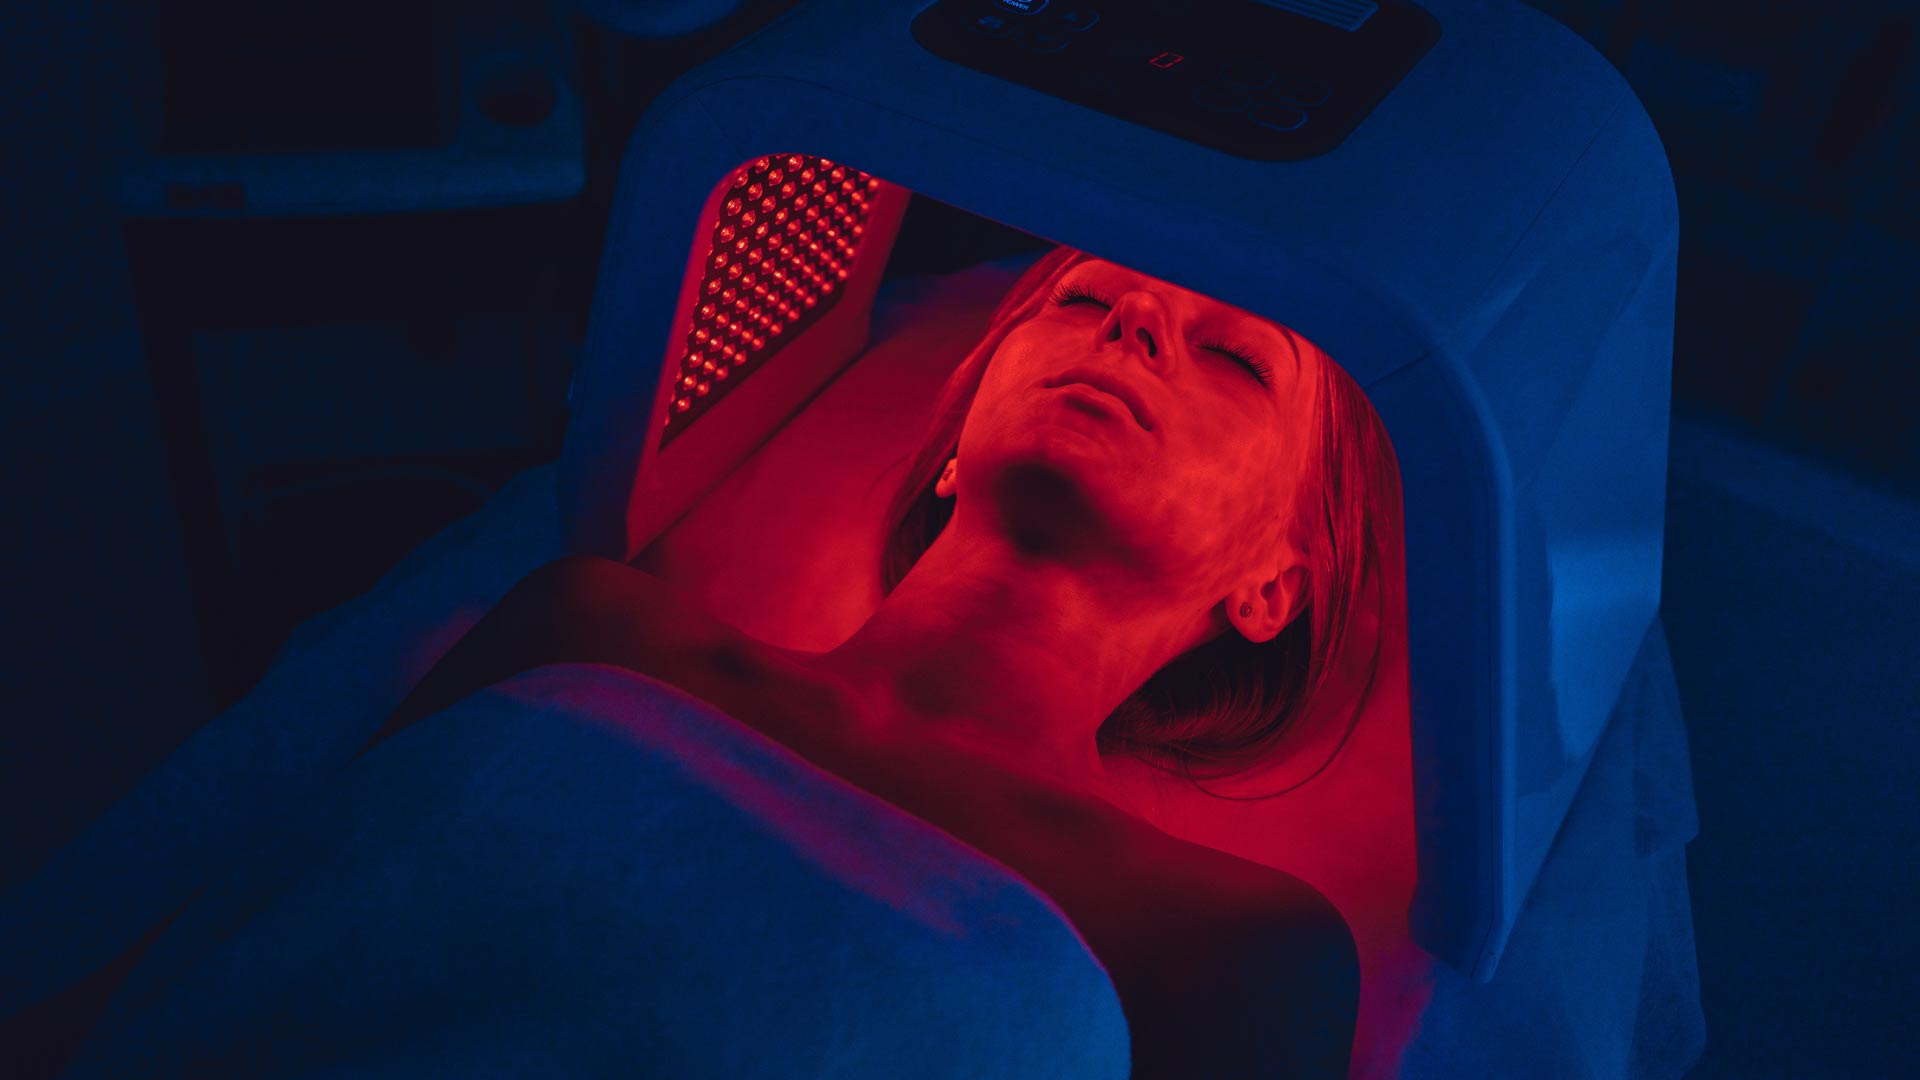 Red light therapy: Benefits and side effects